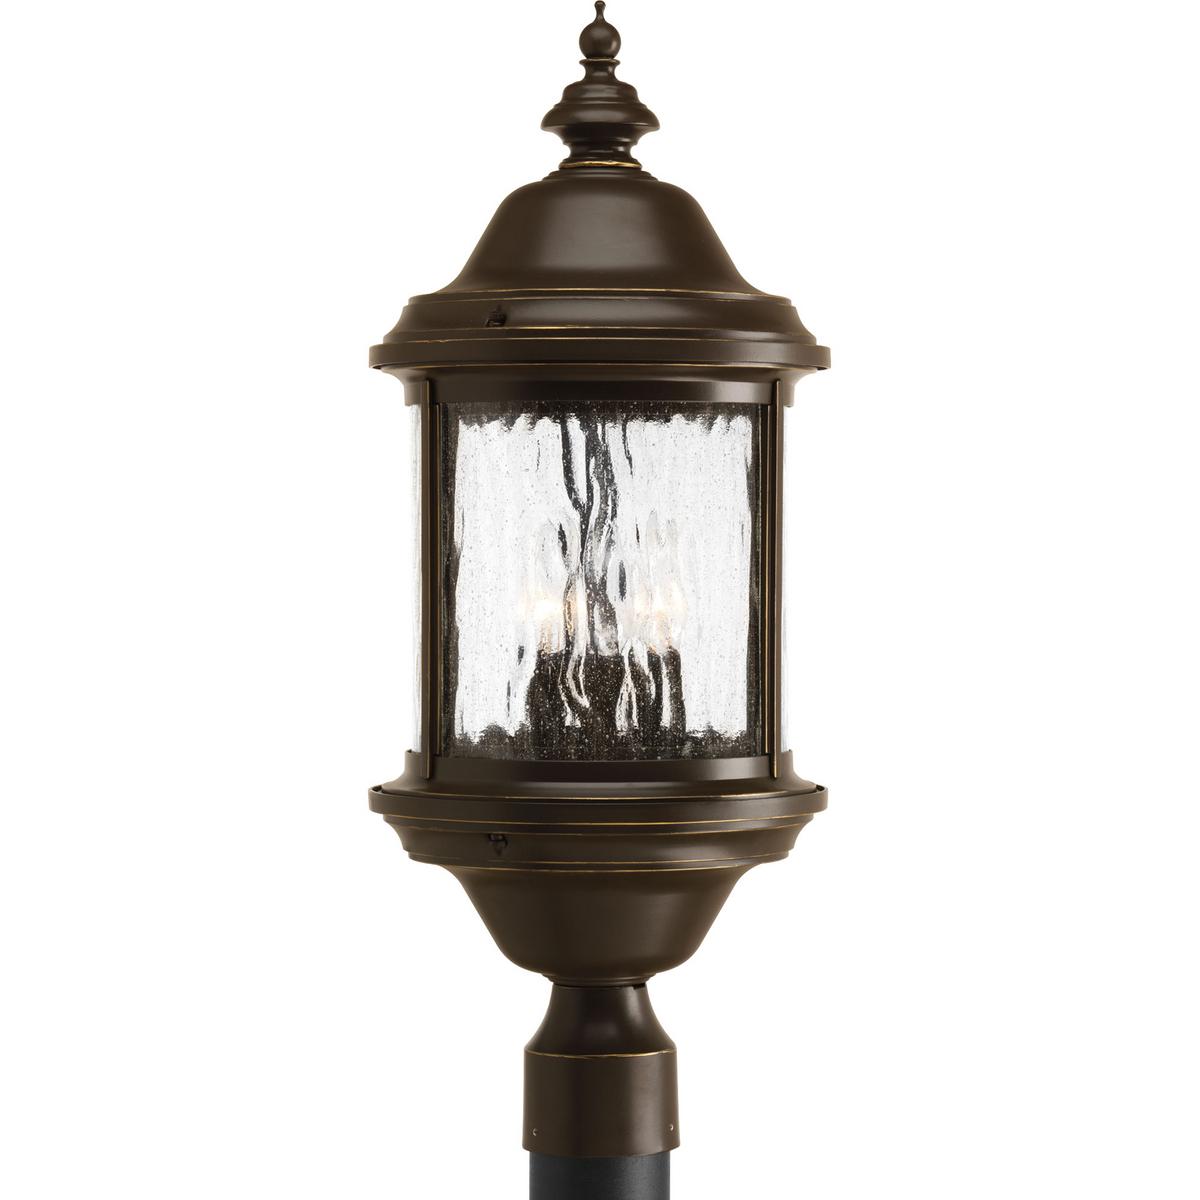 Hubbell P5450-20 Inspired by lanterns from the Old World, the Ashmore collection incorporates handsome details, quill-scrolled arms and decorative finials. The water seeded glass is in a die-cast aluminum frame. The three-light post lantern. Antique Bronze finish.  ; Anti